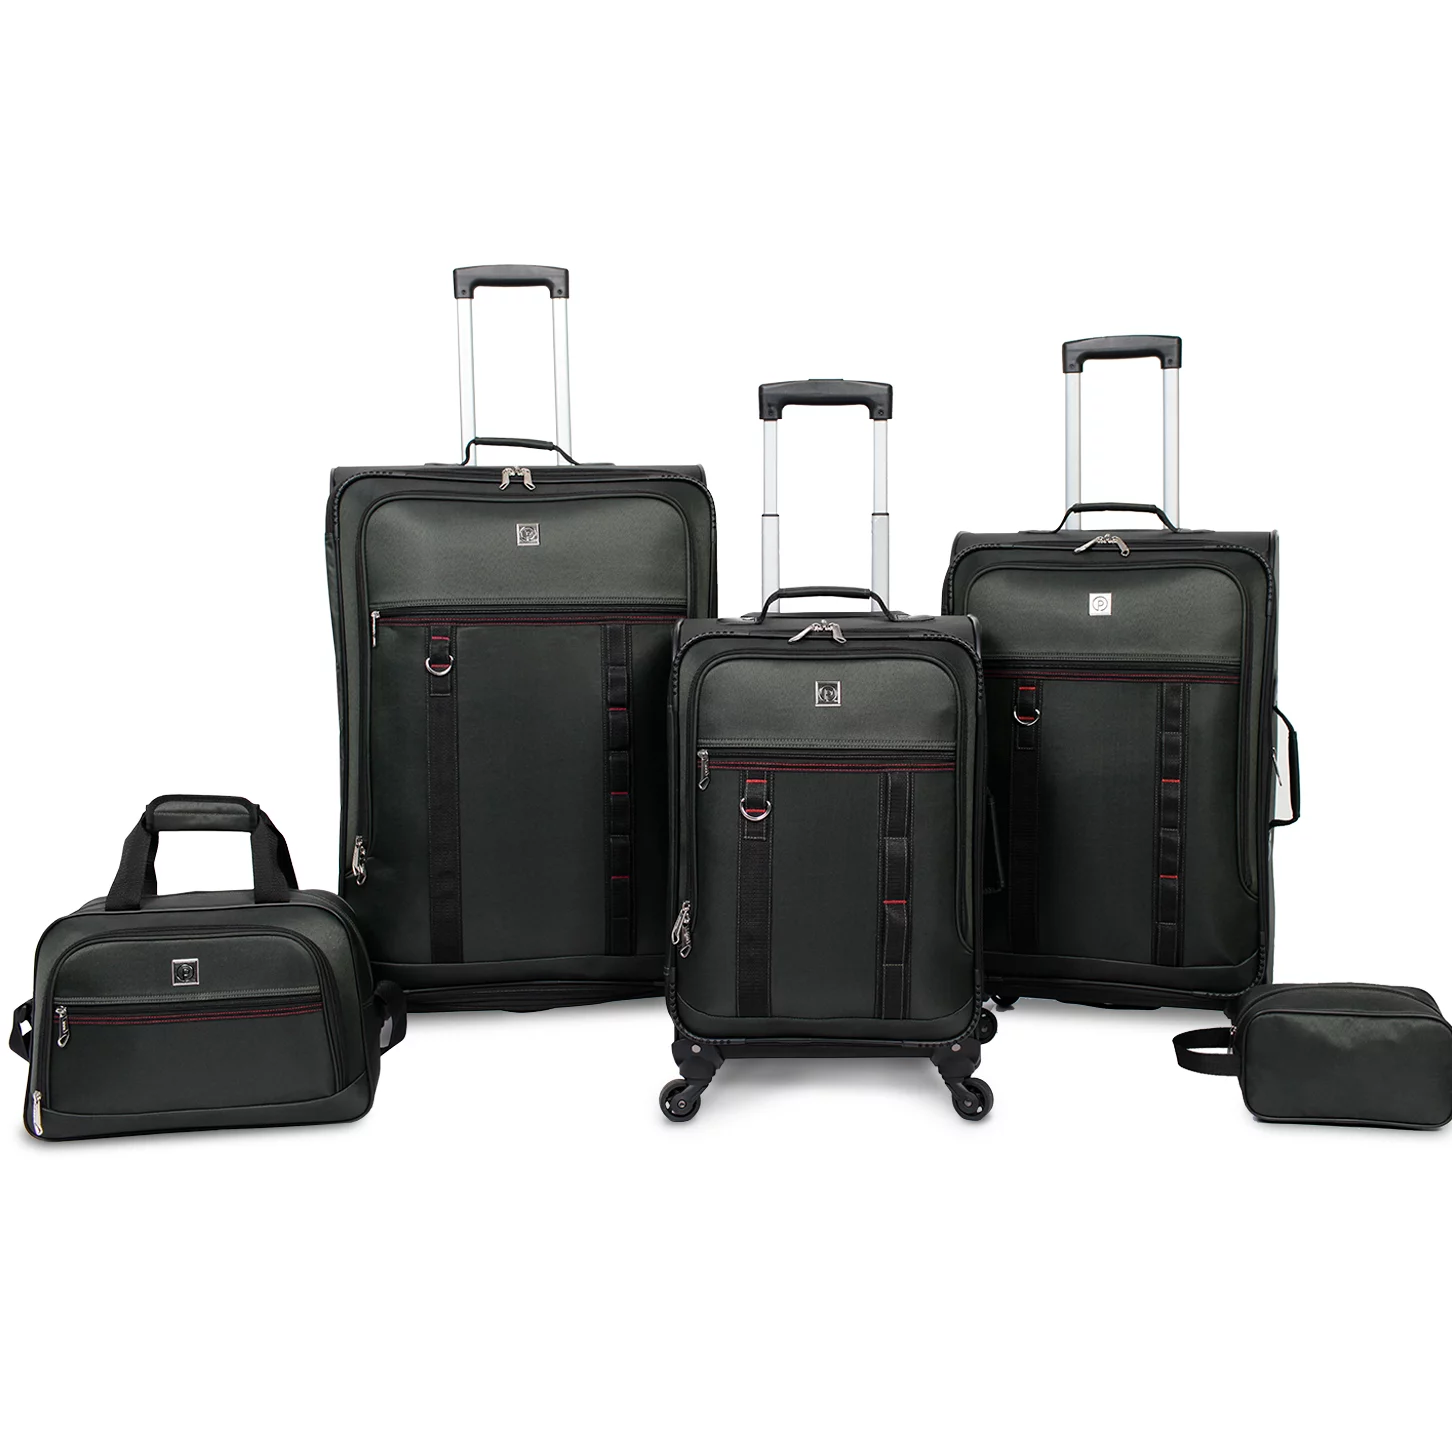 Protege 5 piece Spinner Luggage Set, Includes 28" & 24" Check Bags, 20" Carry-on